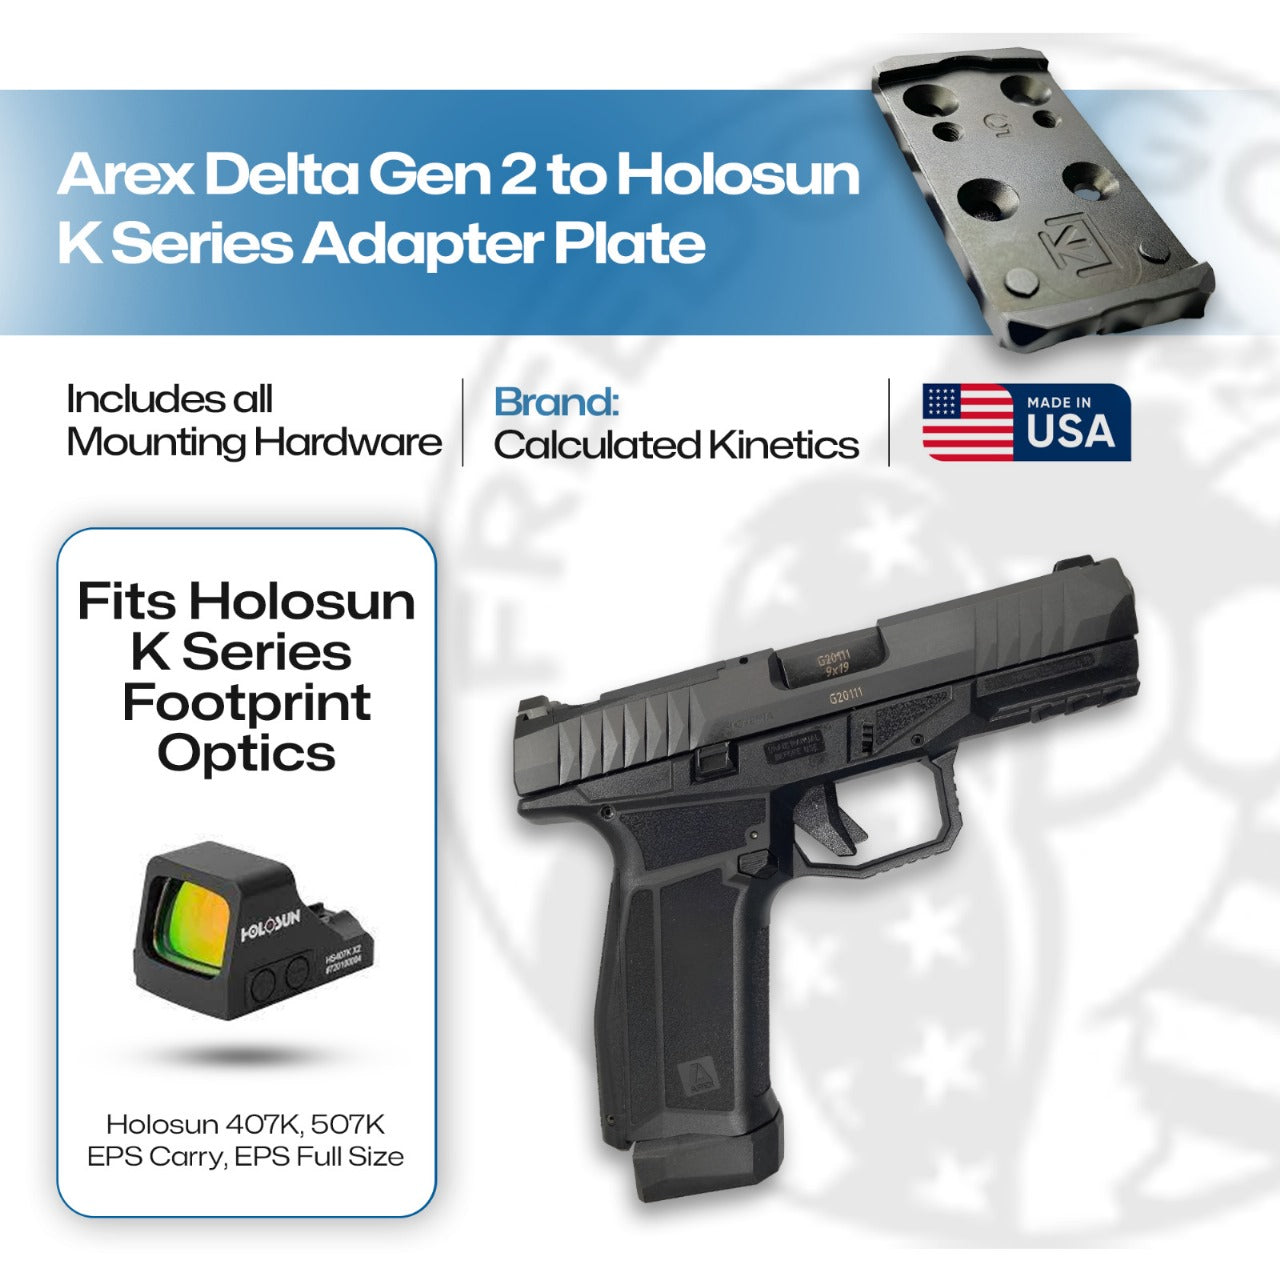 Arex Delta Gen 2 to Holosun 407K/507K/EPS/EPS Carry Adapter Plate - Aluminum - Calculated Kinetics